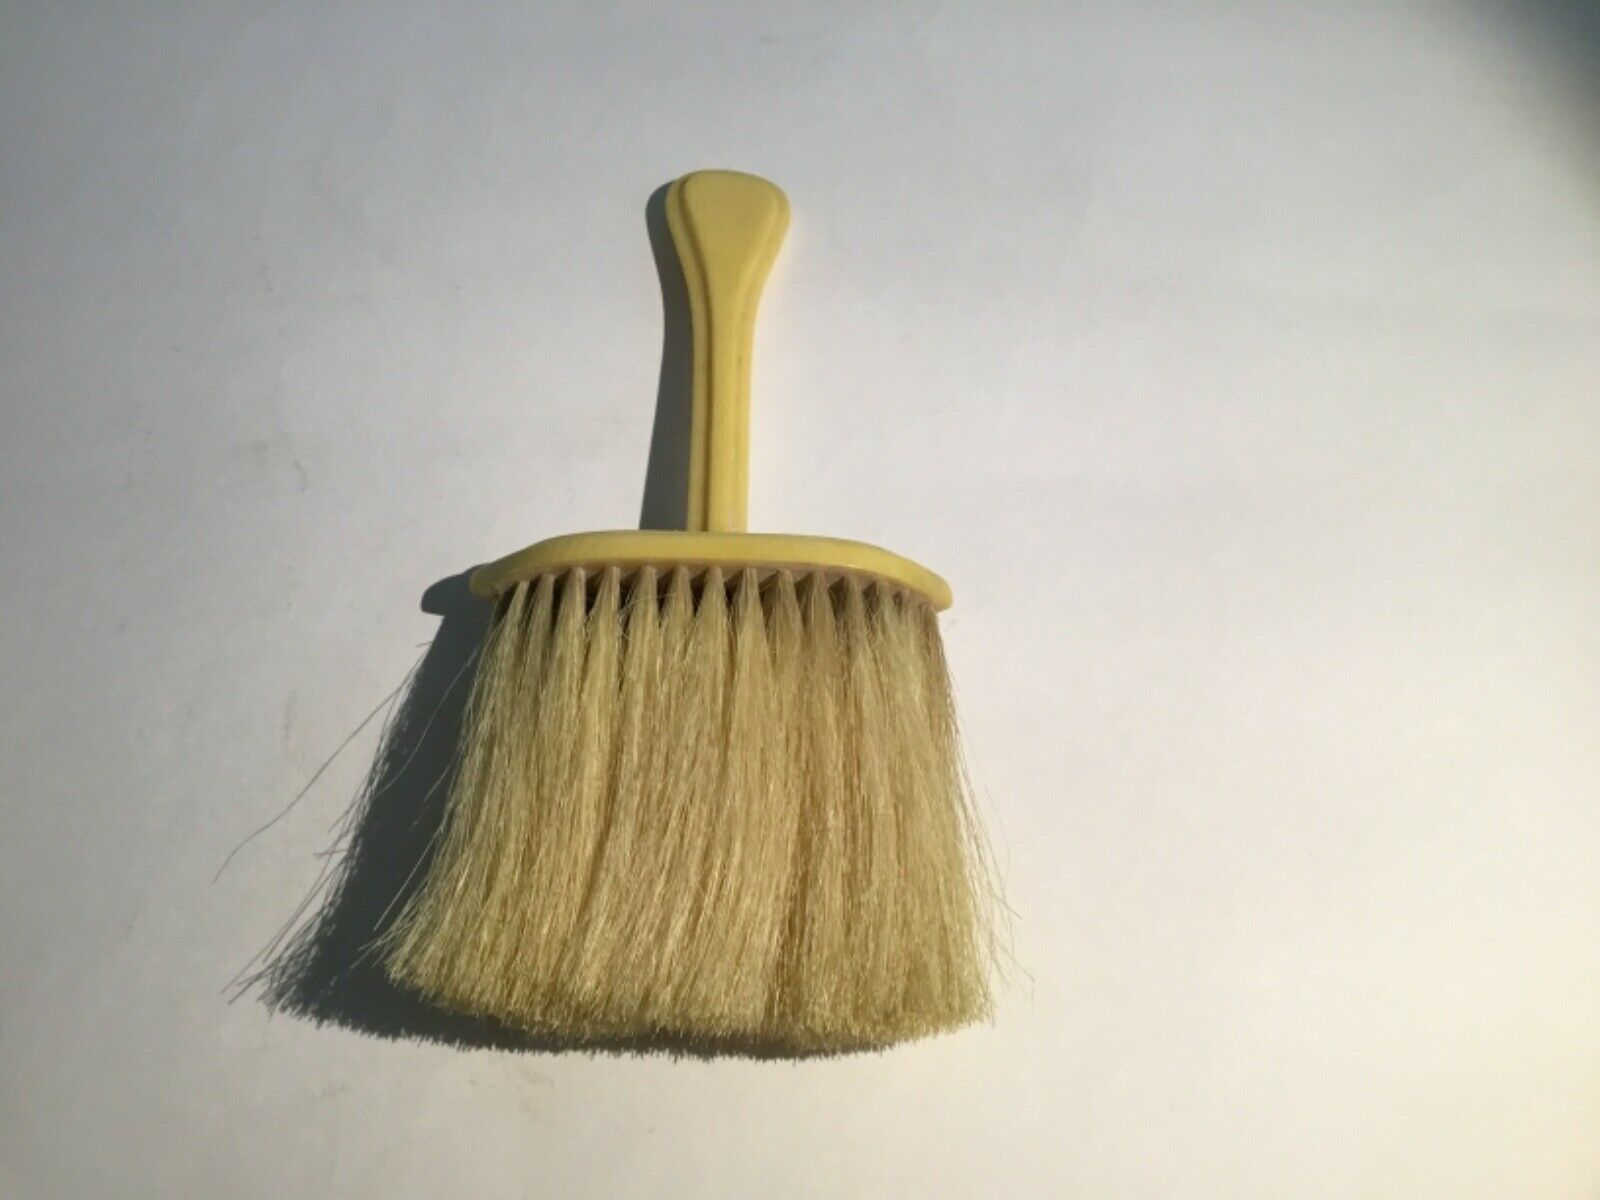 Vintage Early 1900’s Celluloid Horse Hair Barber’s Neck Brush / Duster